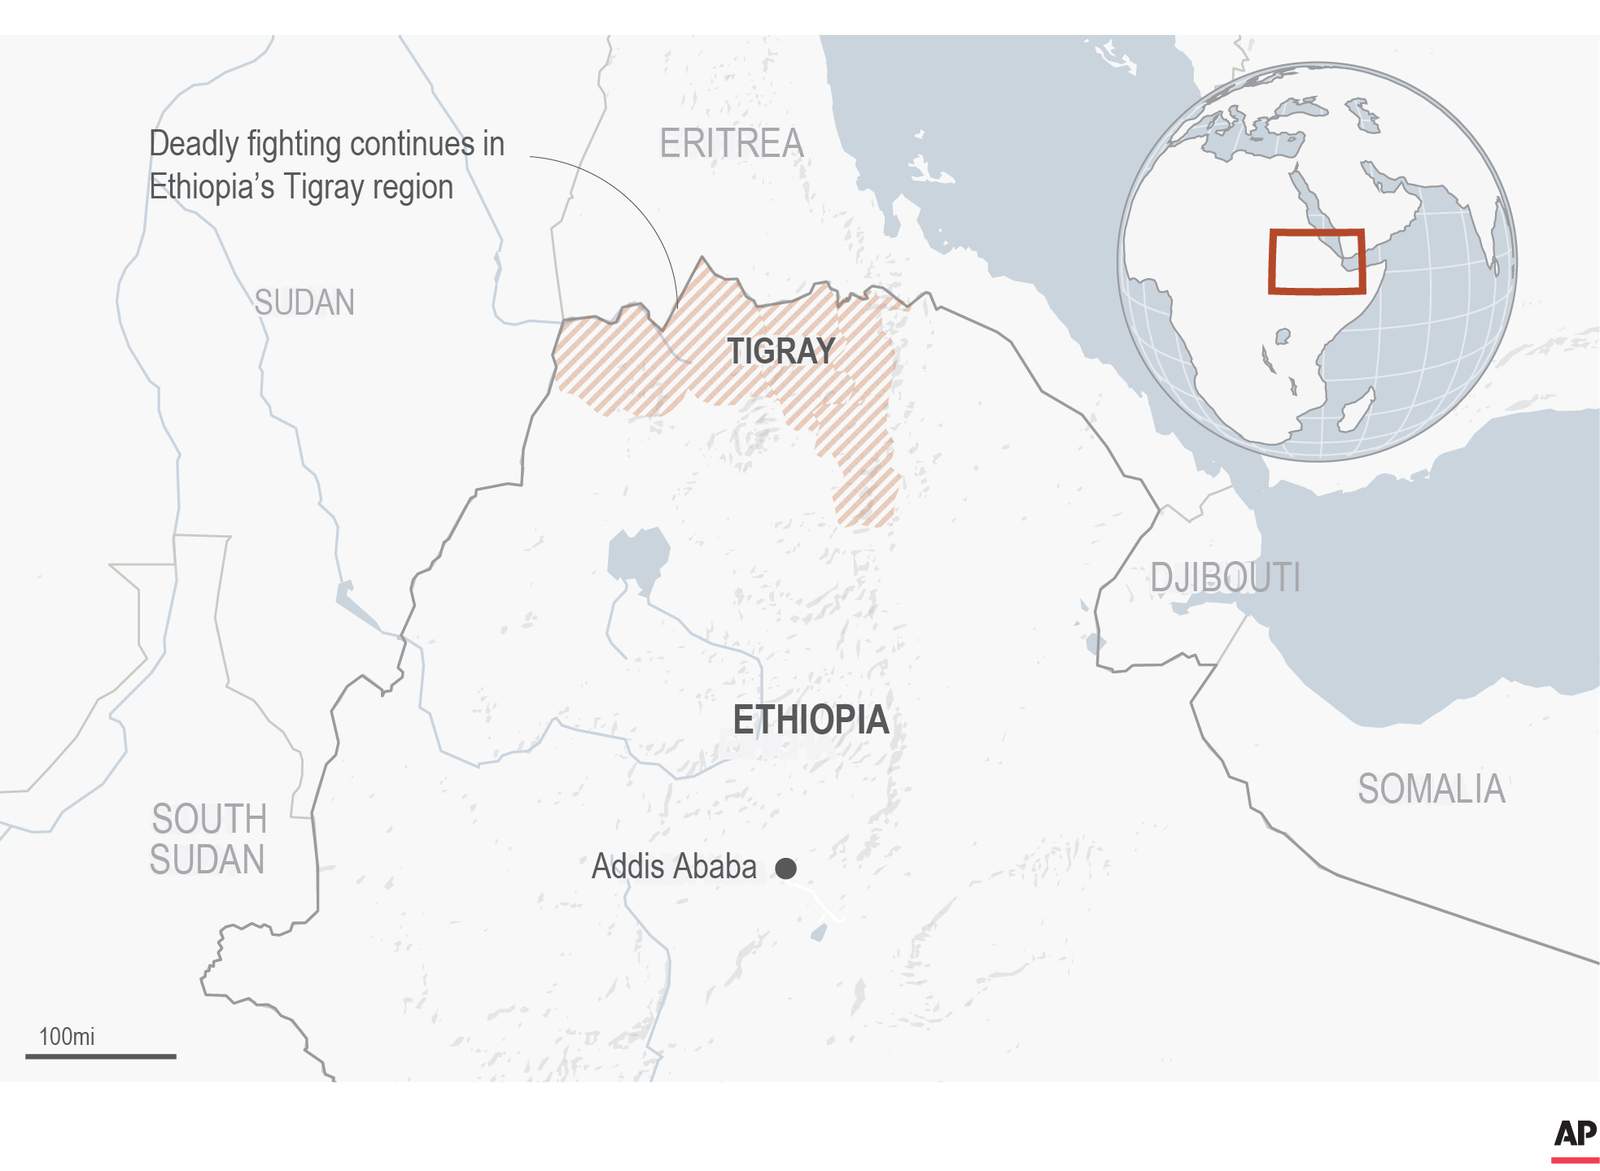 Diplomats: Rockets fired at Eritrea amid Ethiopian conflict